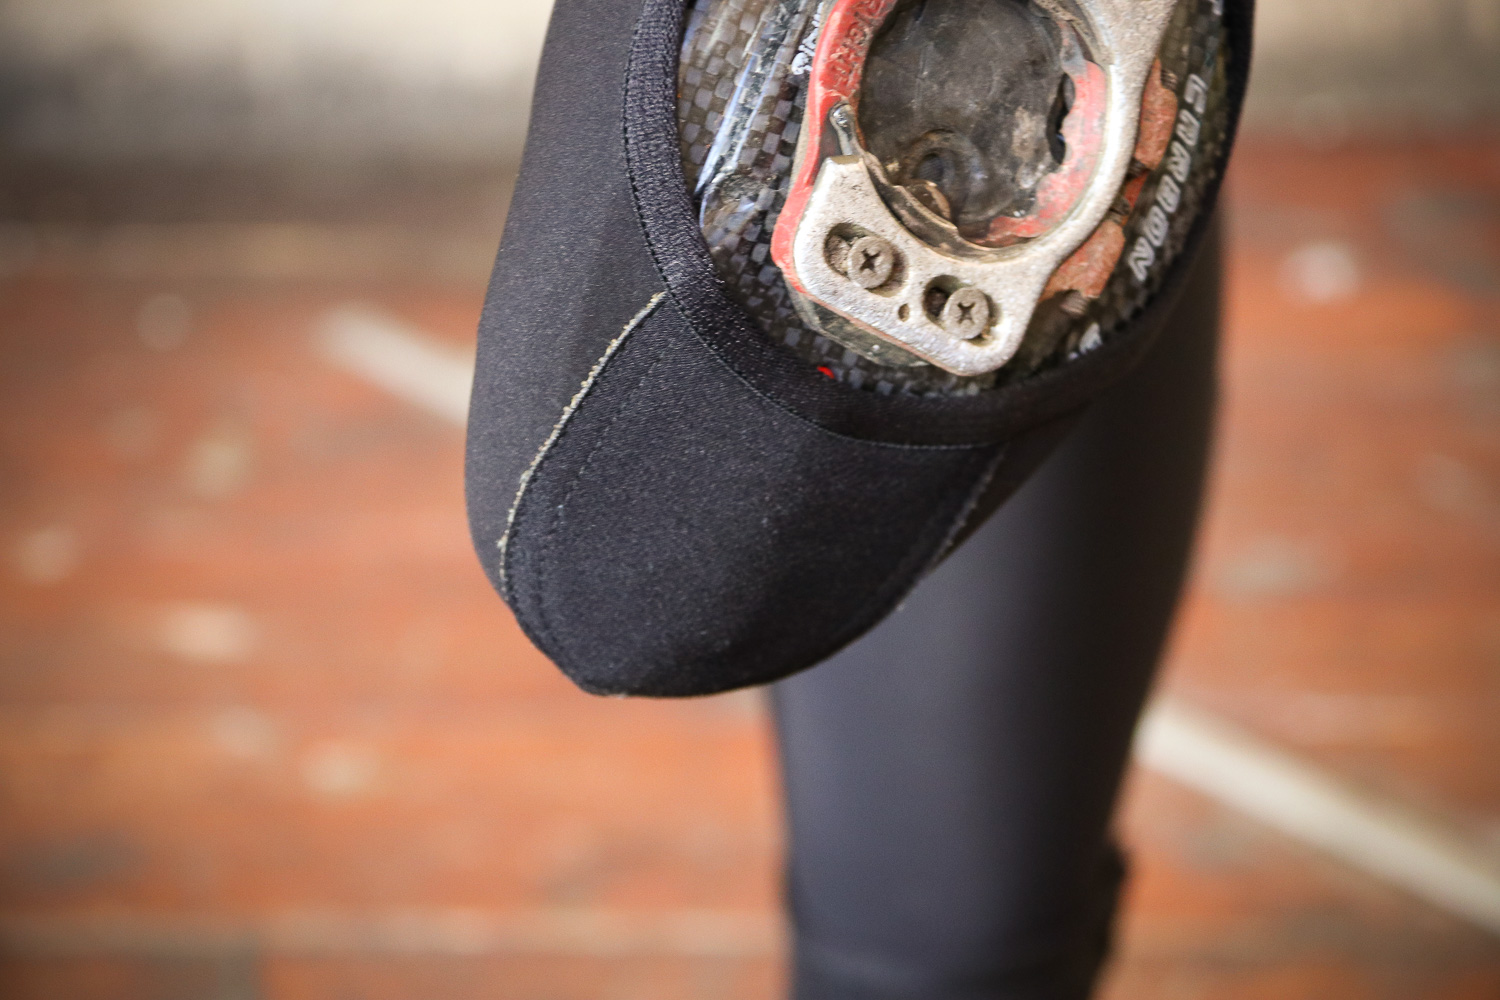 Review: Rapha Pro Team Overshoes | road.cc